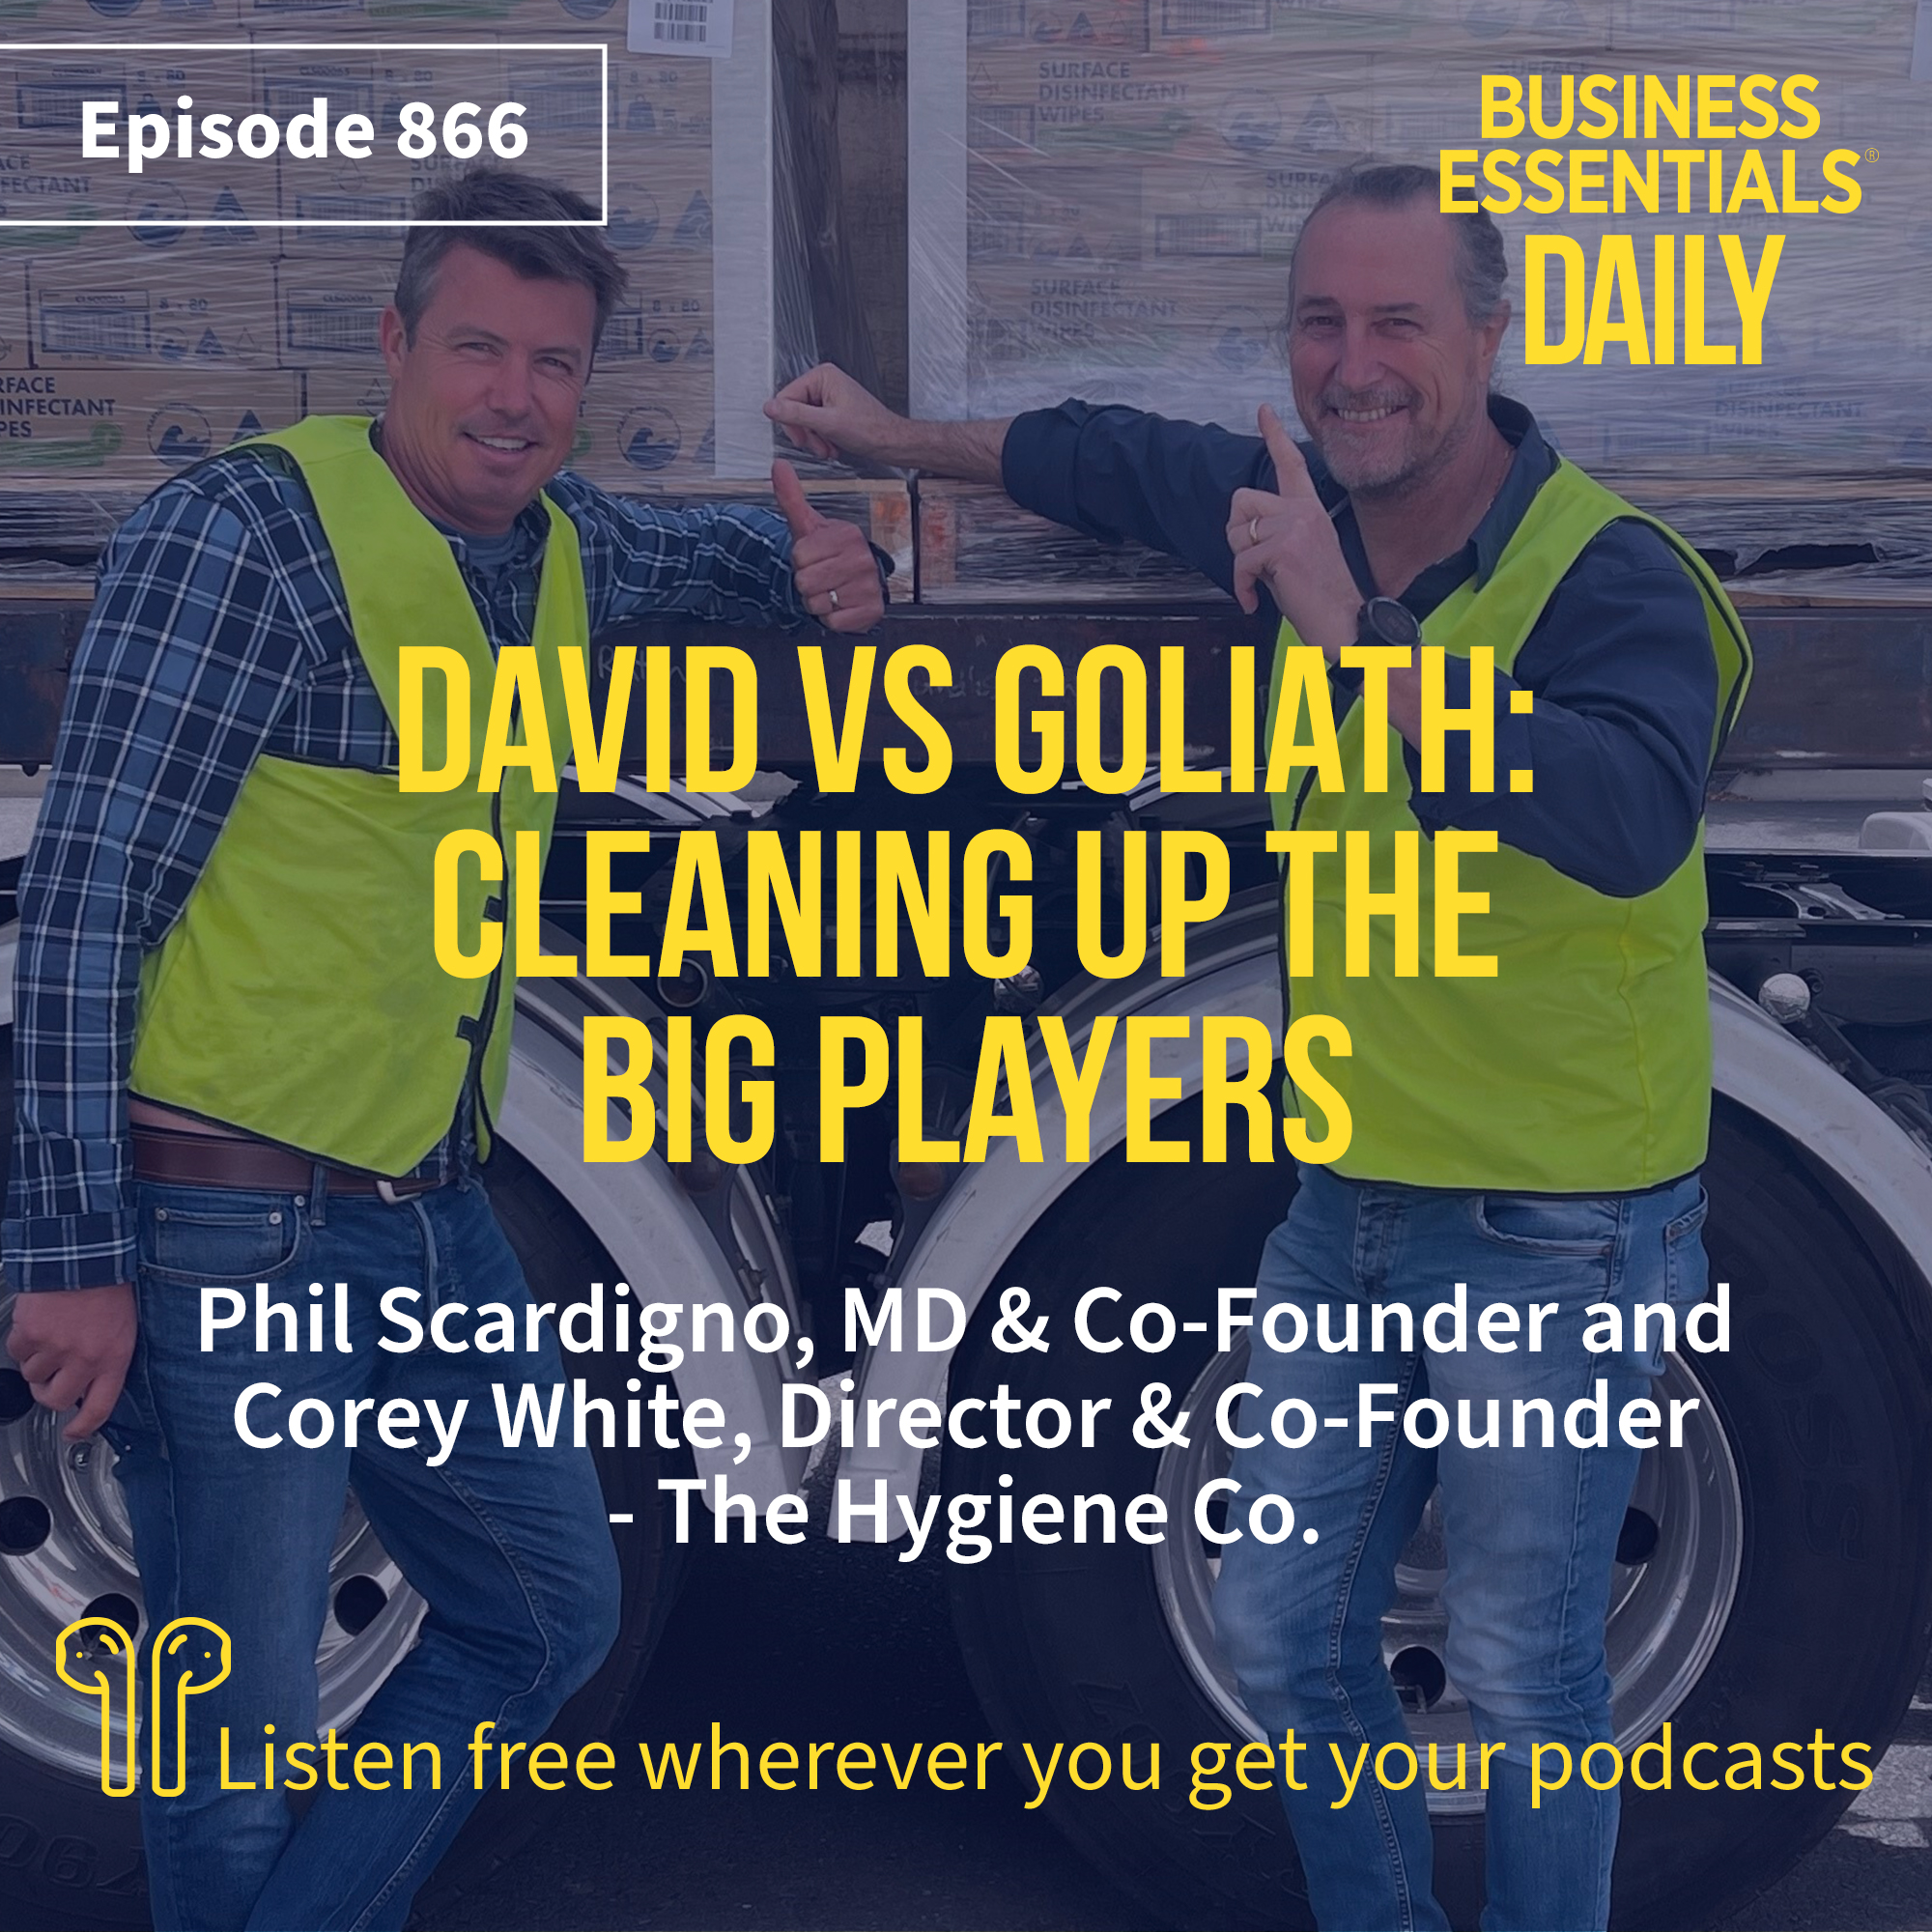 David vs Goliath: Cleaning up the big players